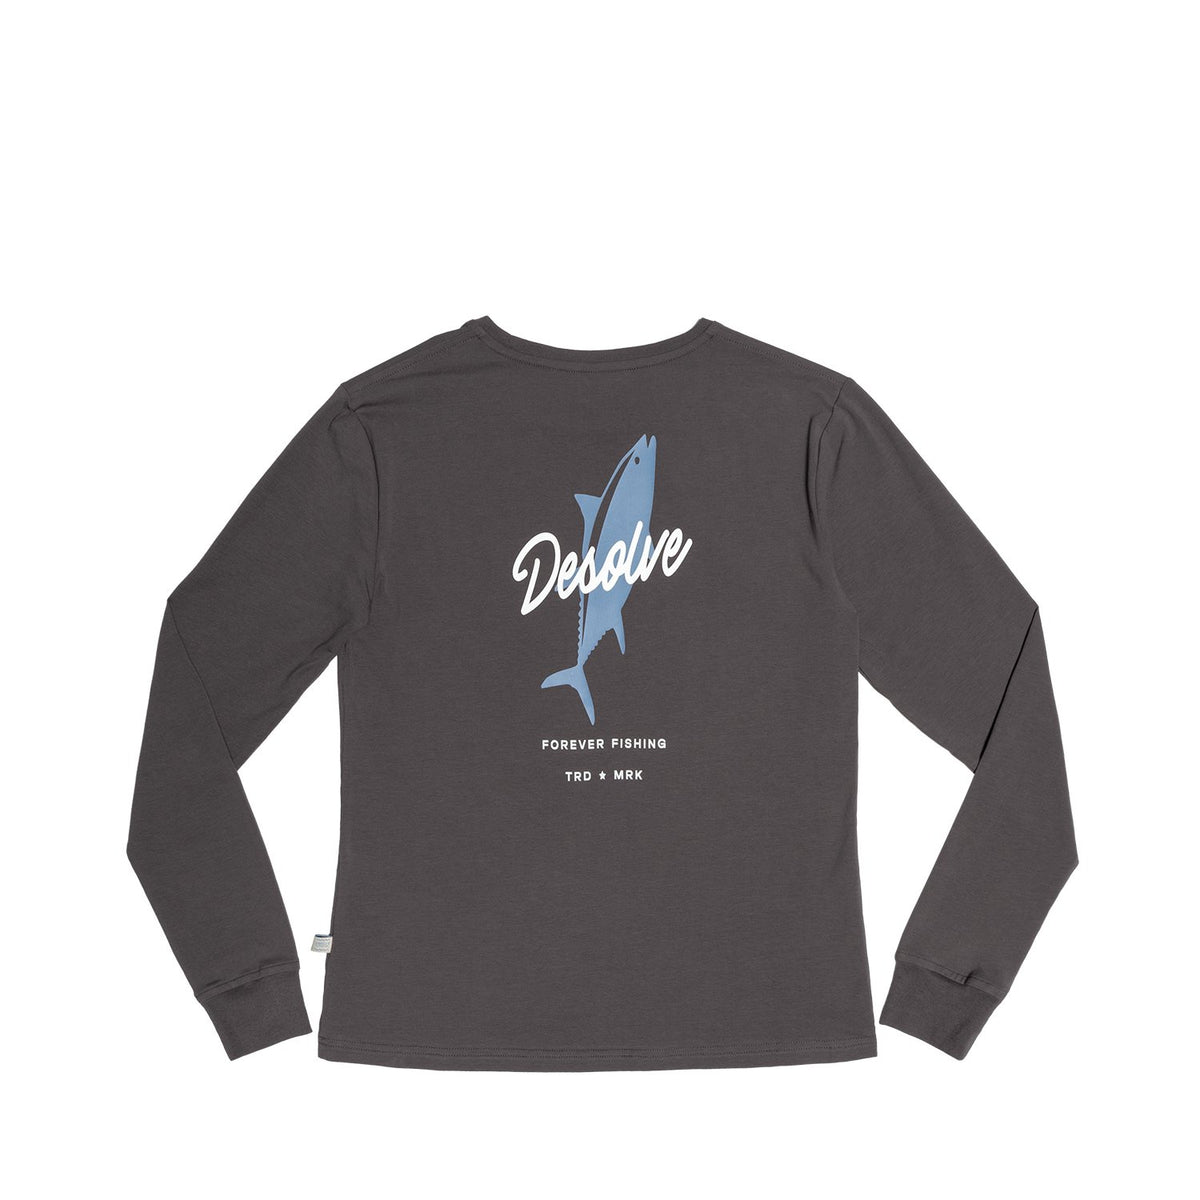 Desolve Supply Co, Forever Fishing LS Tee, UPF 50+